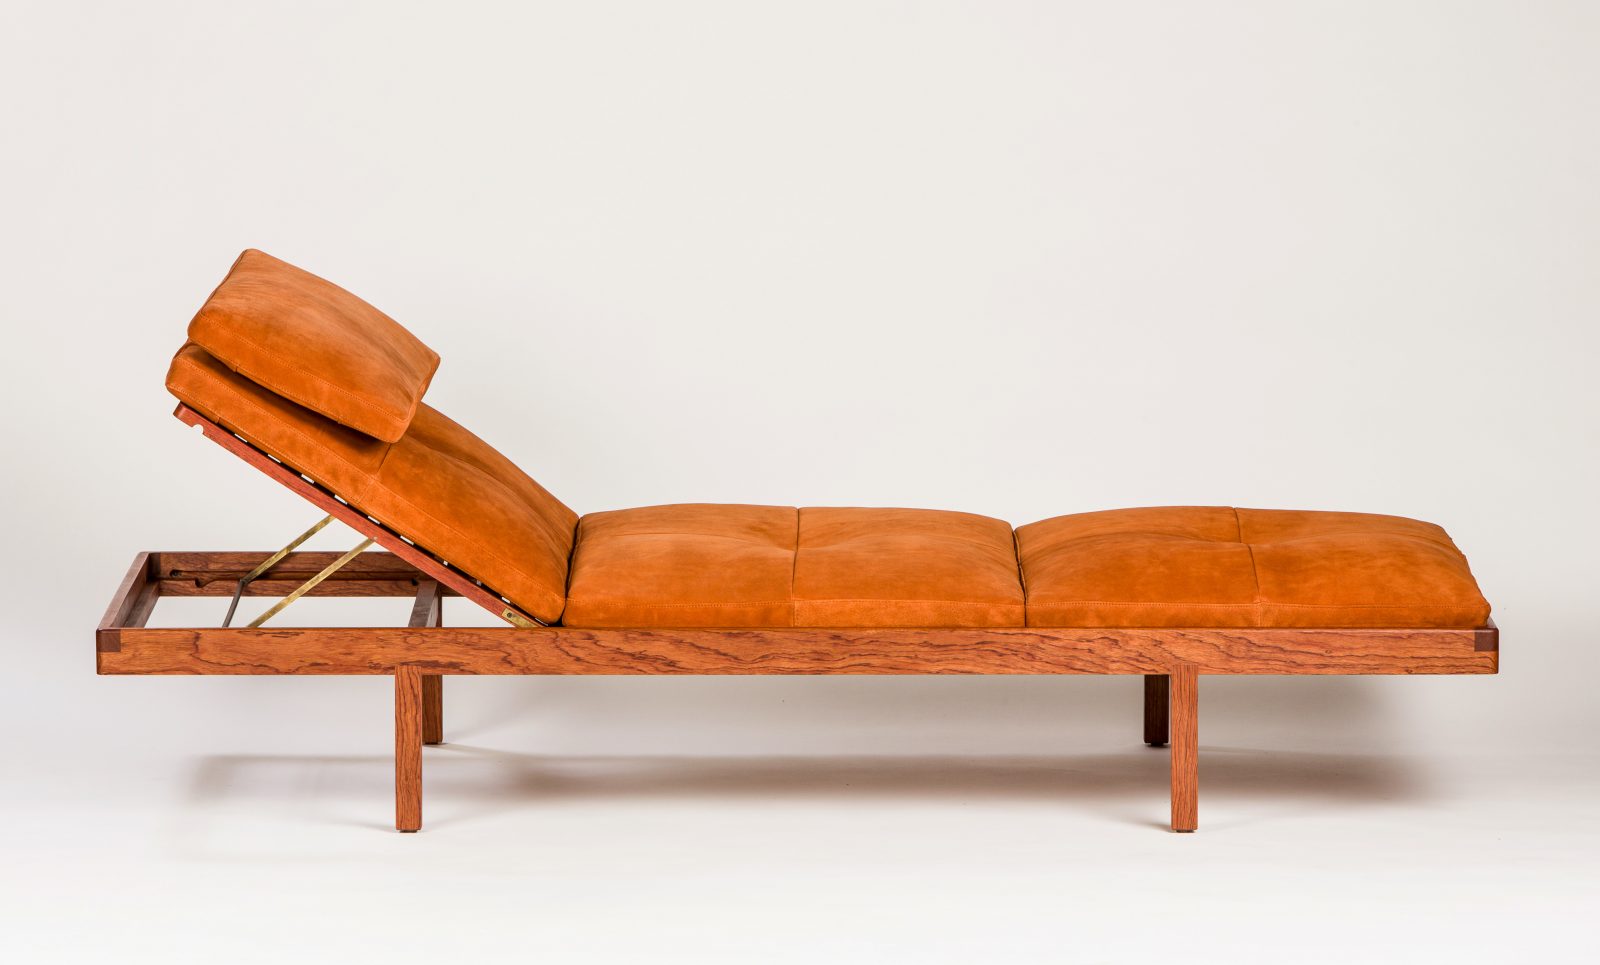 BassamFellows CB-41 Daybed in bespoke solid African Rosewood and French calf suede, detail, credit ELDON ZIMMERMAN